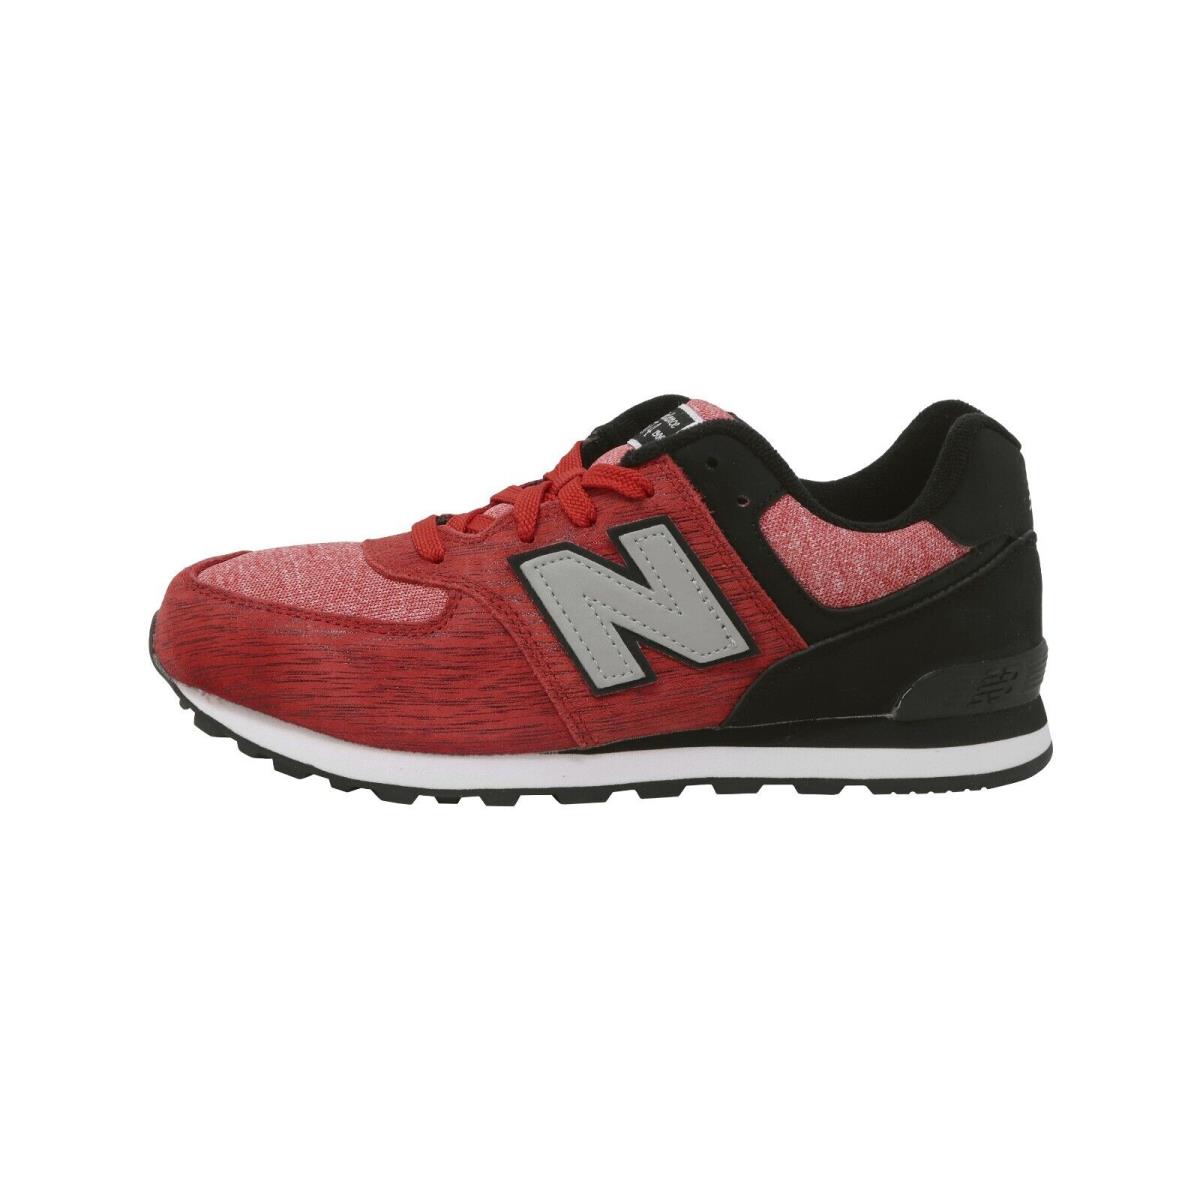 New Balance 574 Big Kids Running Shoes Sneakers KL574BEG - Red/black